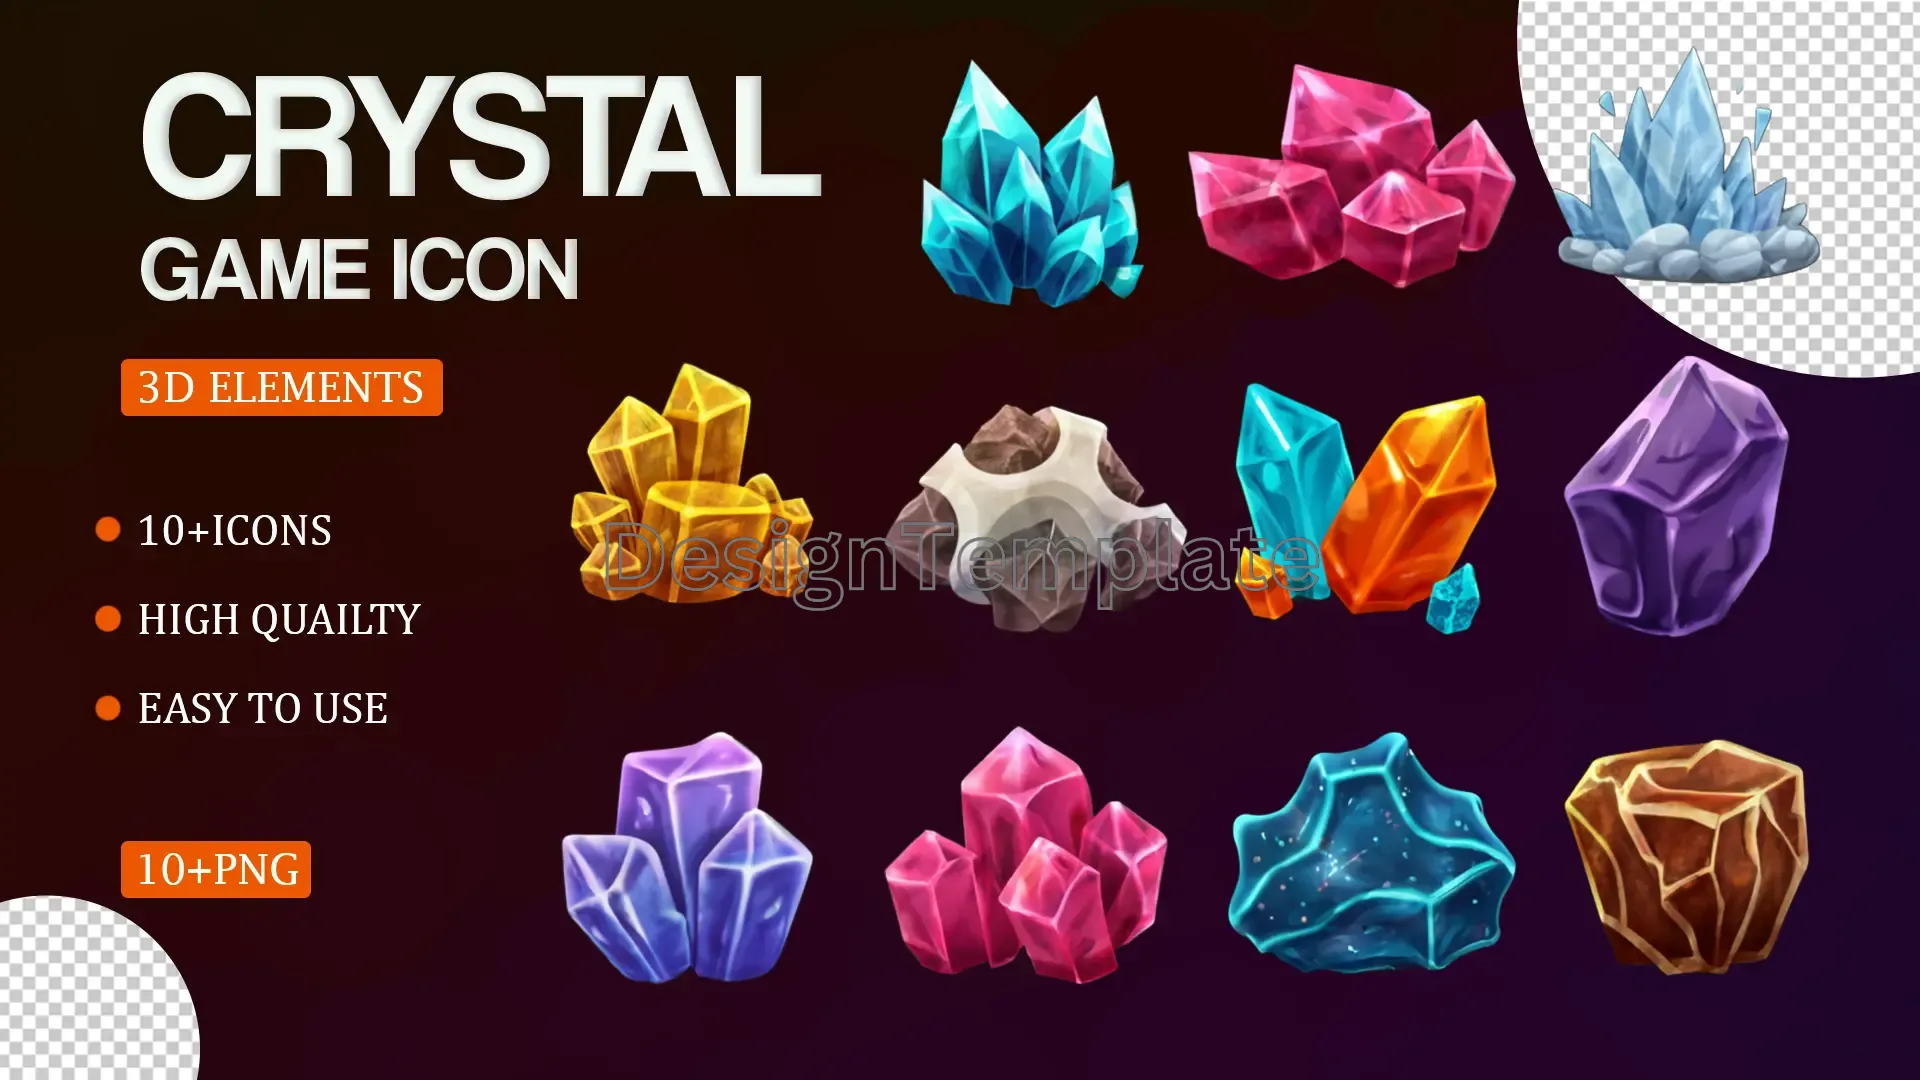 Fantasy Game Crystals A Luxurious 3D Elements Pack